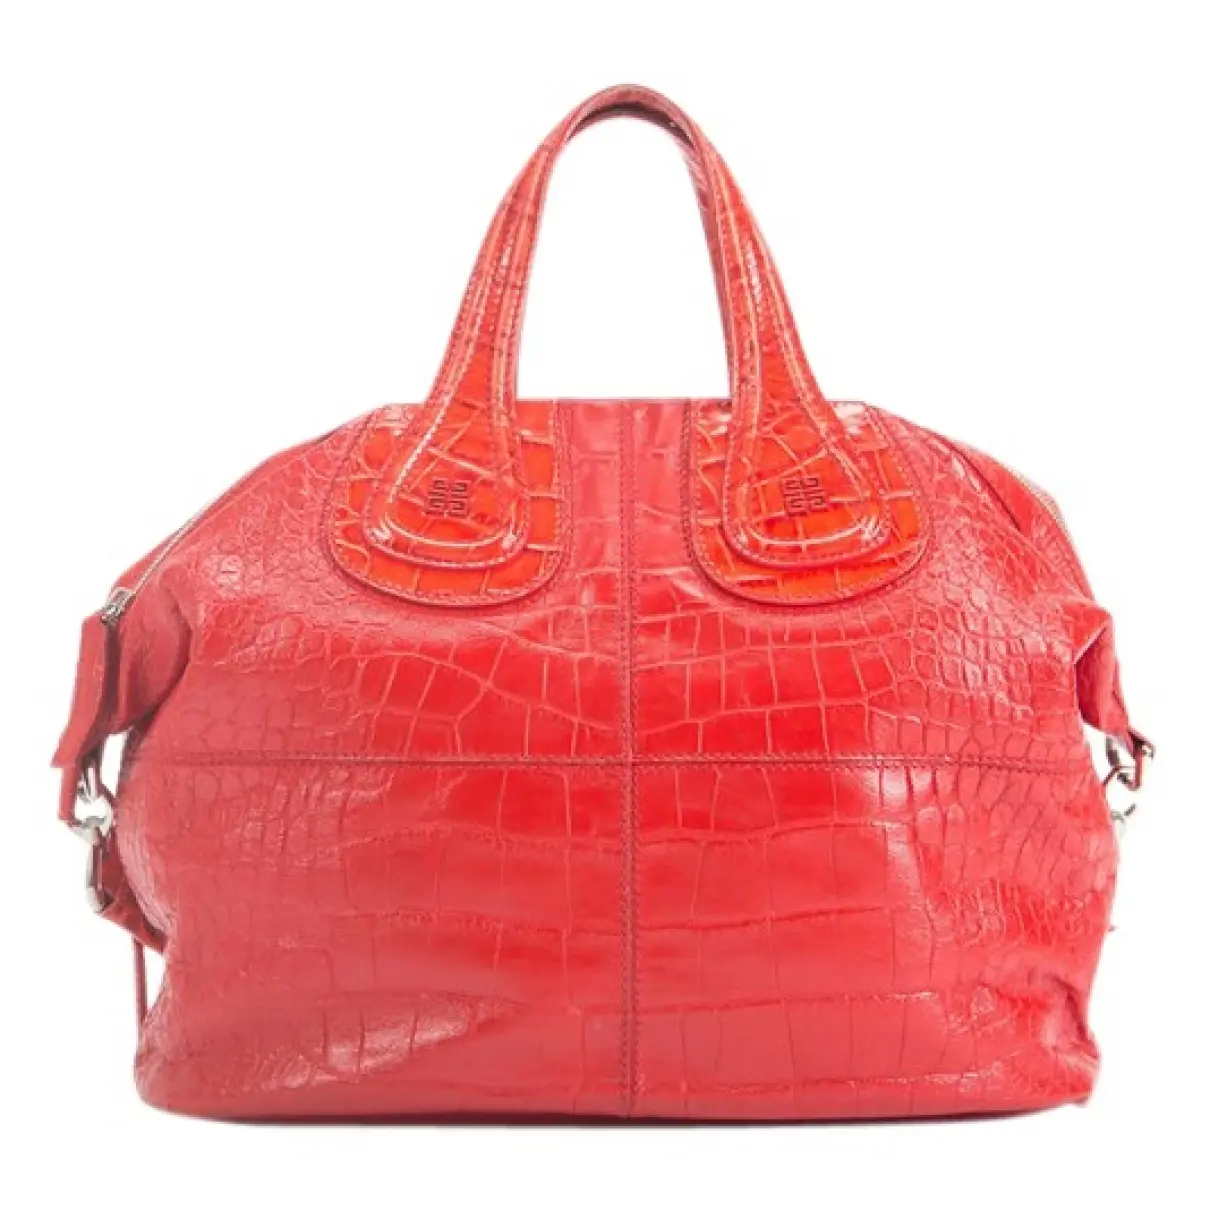 Nightingale leather tote Givenchy